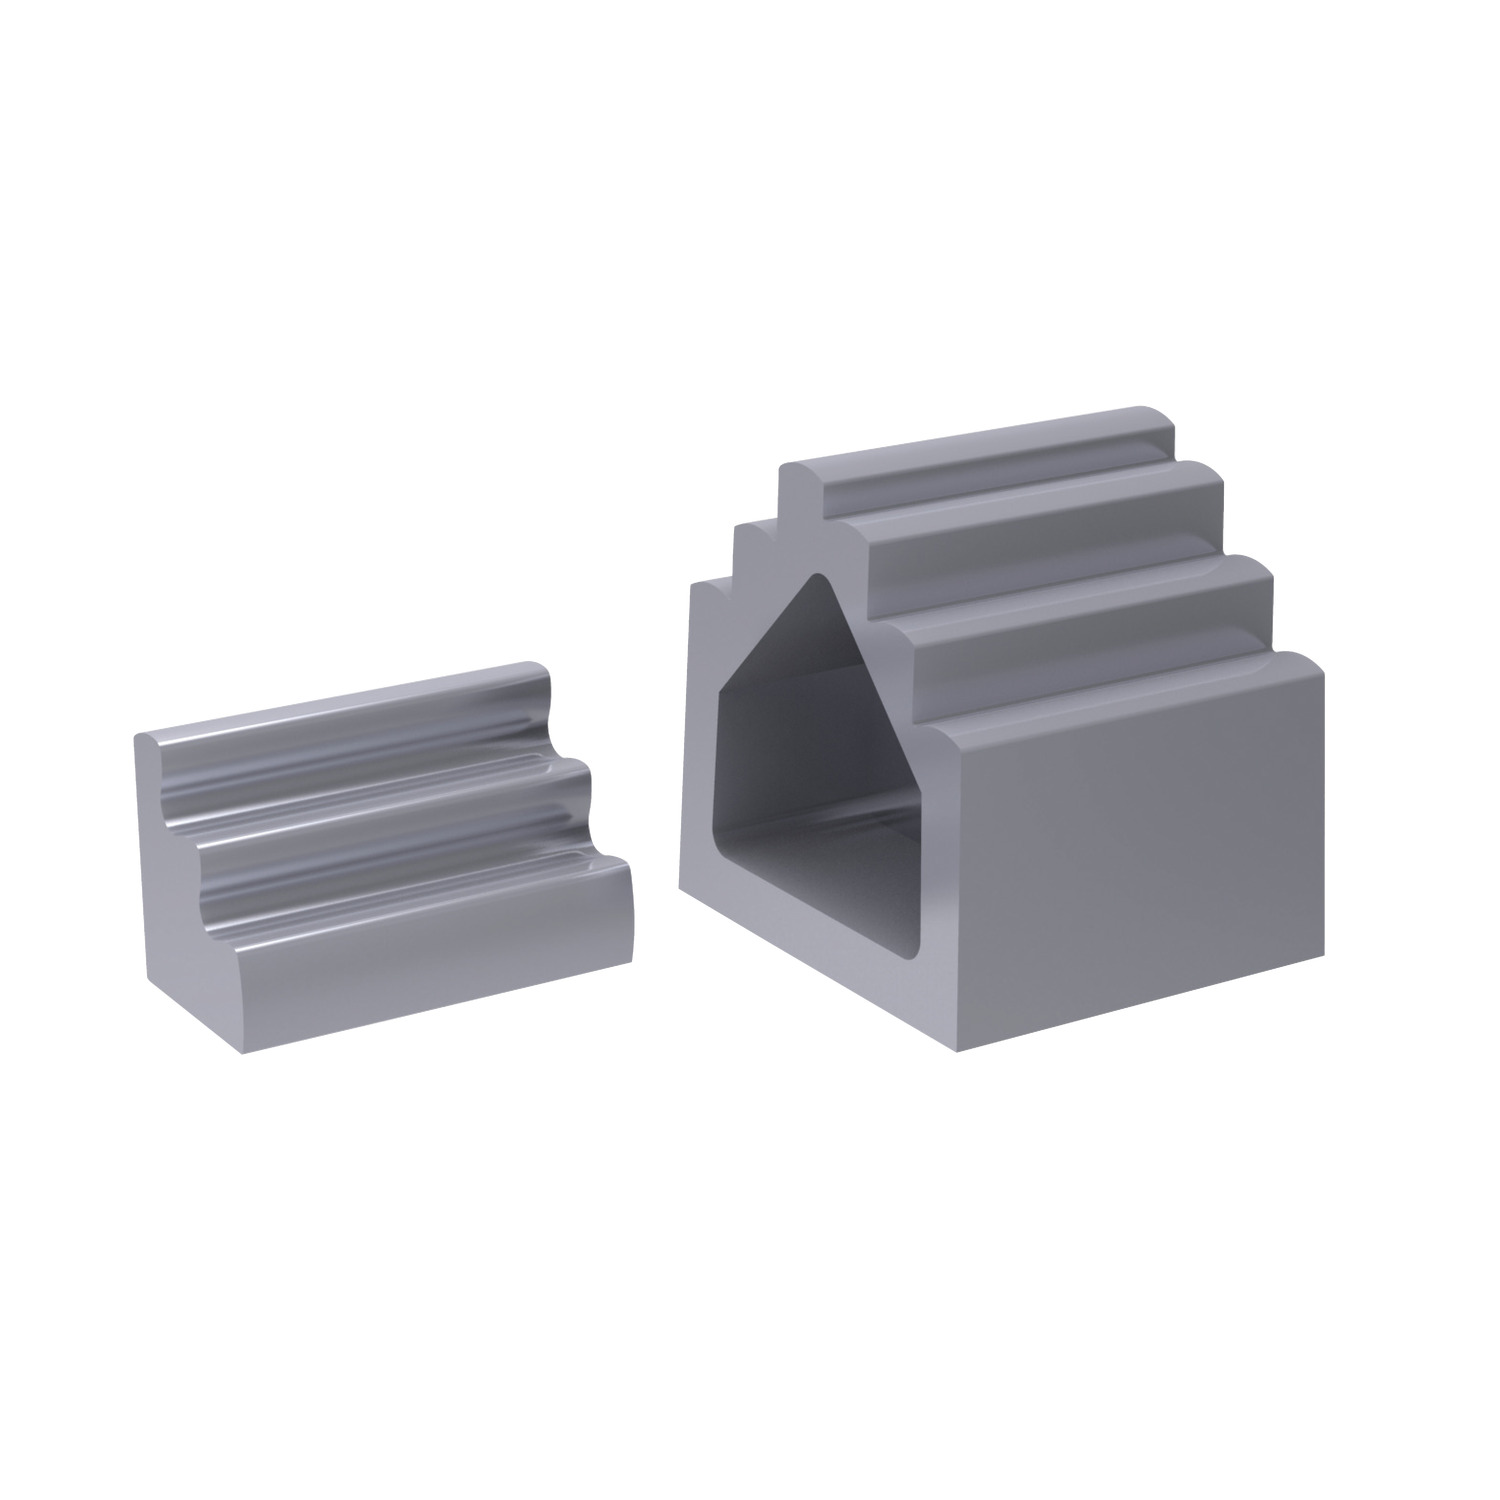 Product 14150, Step Blocks - Large extra wide / 